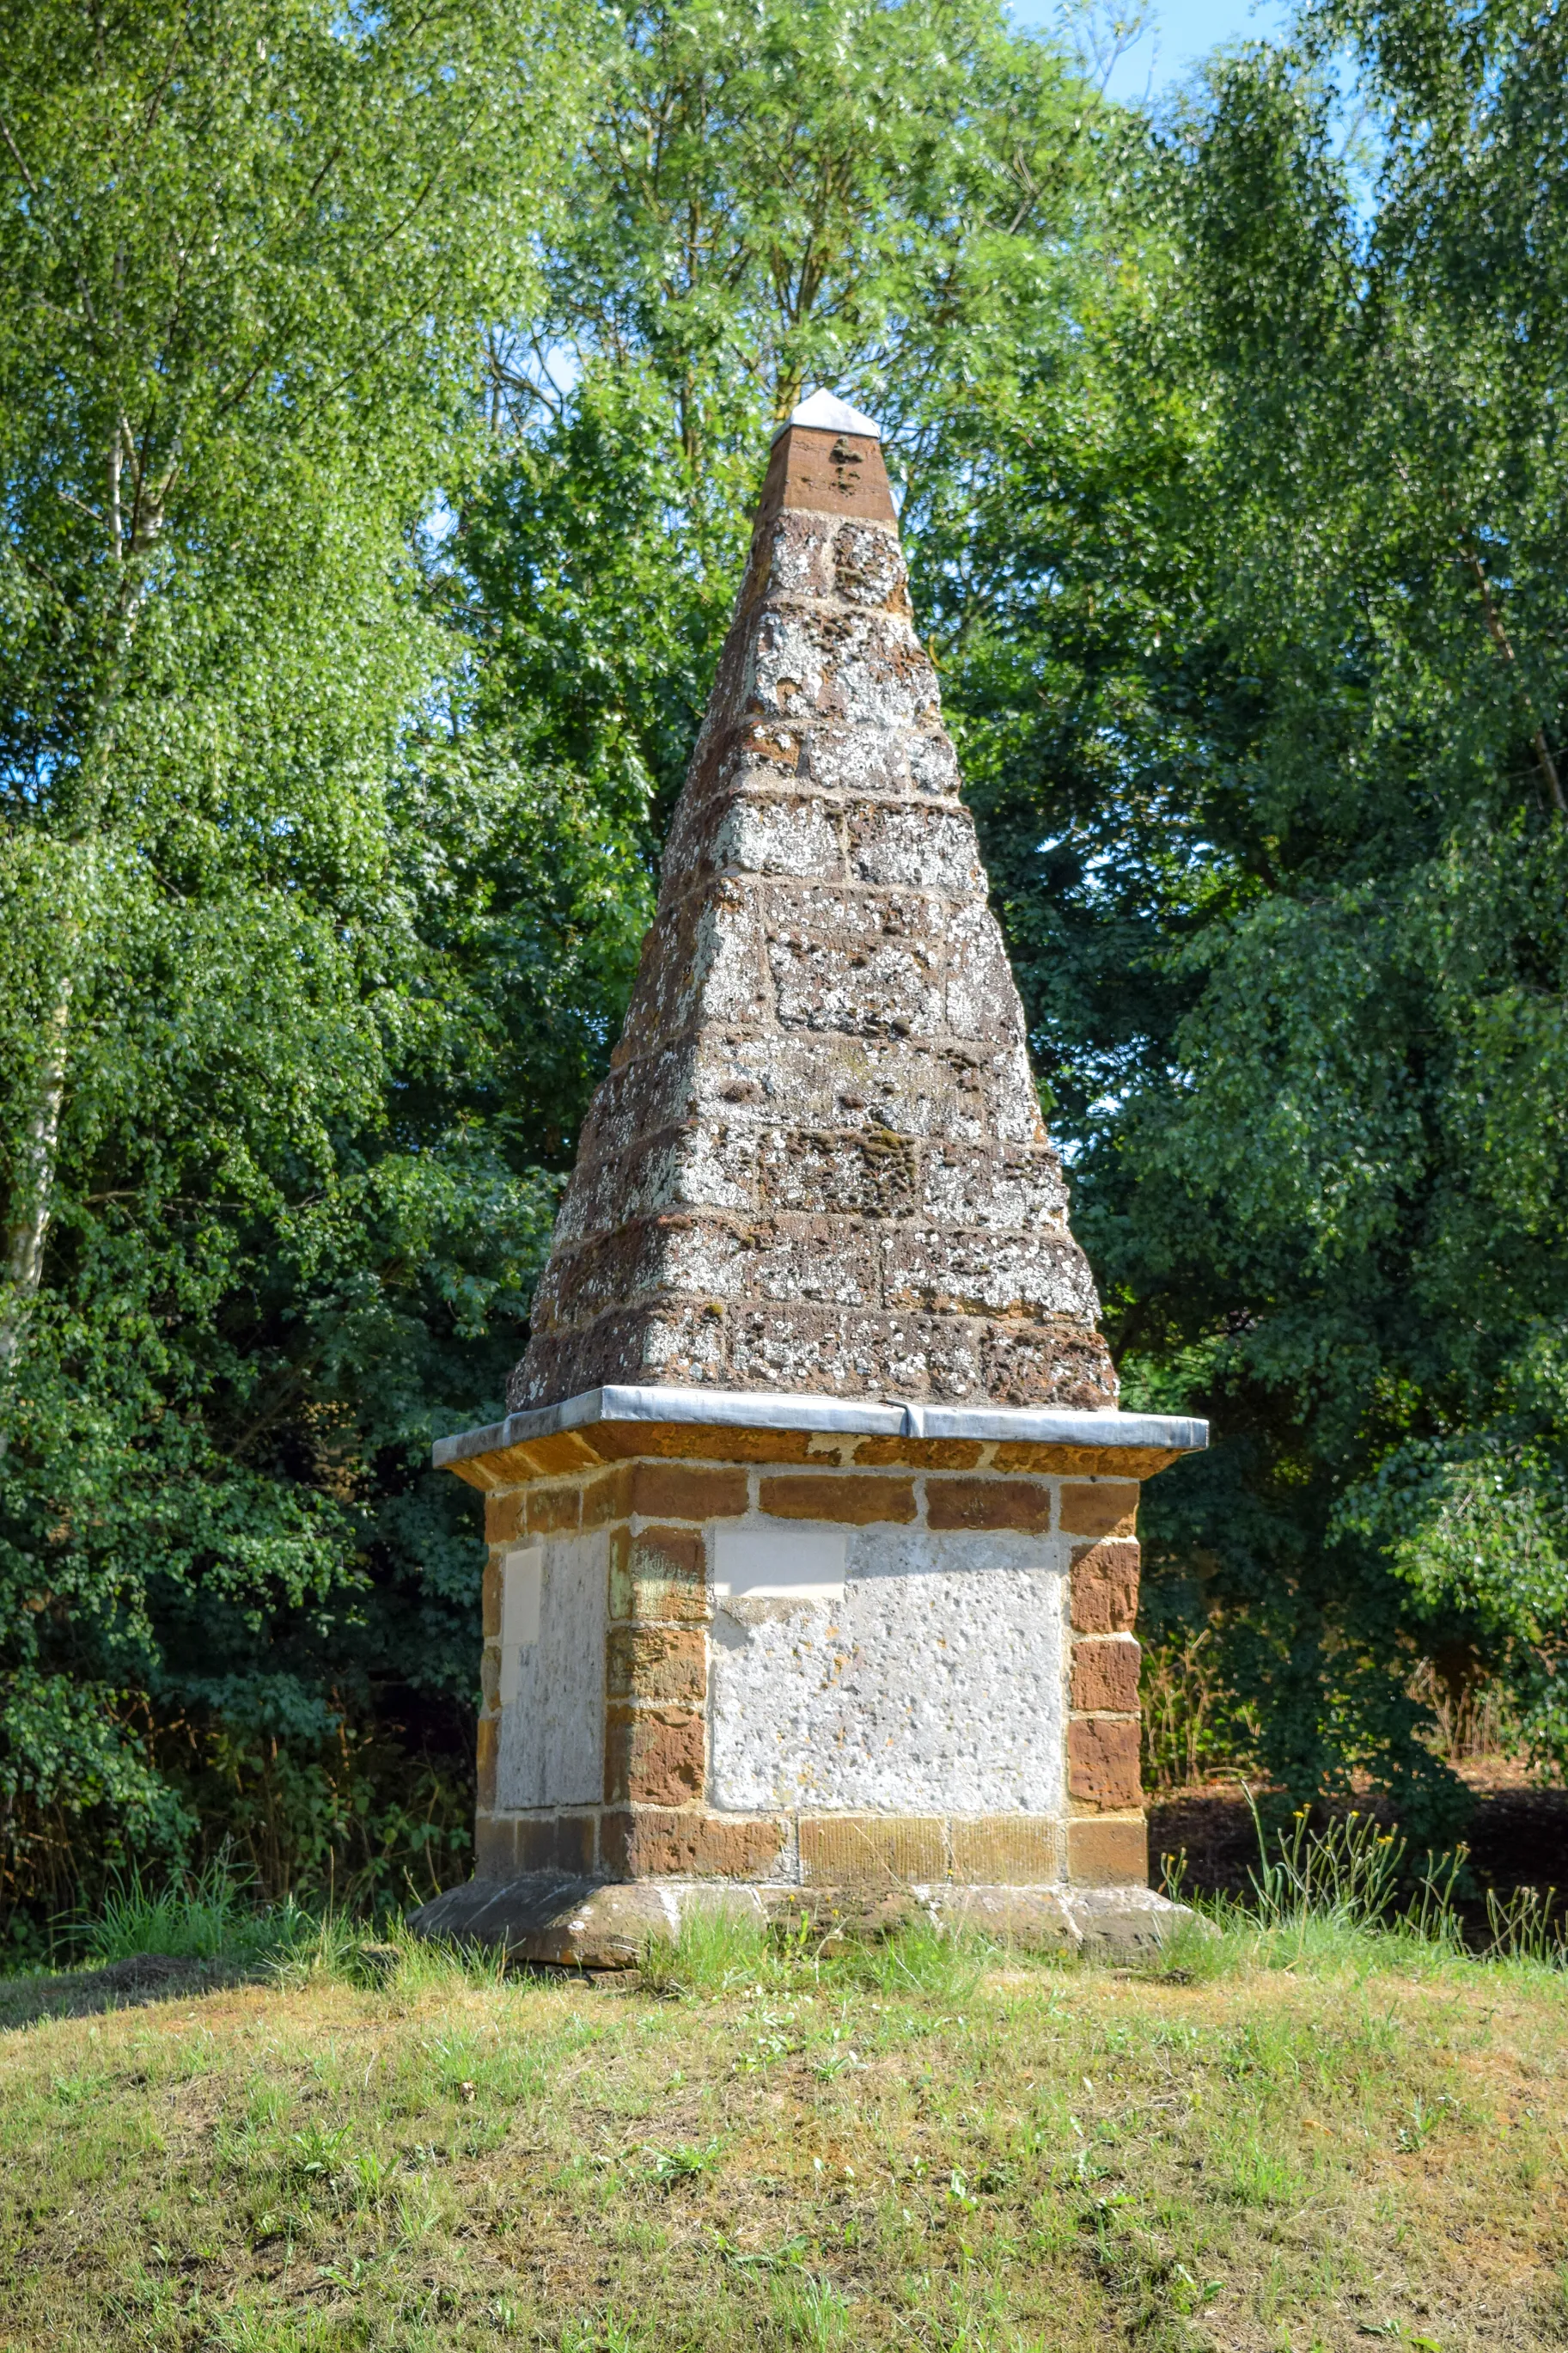 Photo showing: The Finedon Obelisk was erected in 1798 by John English Dolben Esq. as a way marker and to record the blessings of that year, which are thought to include the return to sanity of King George III.